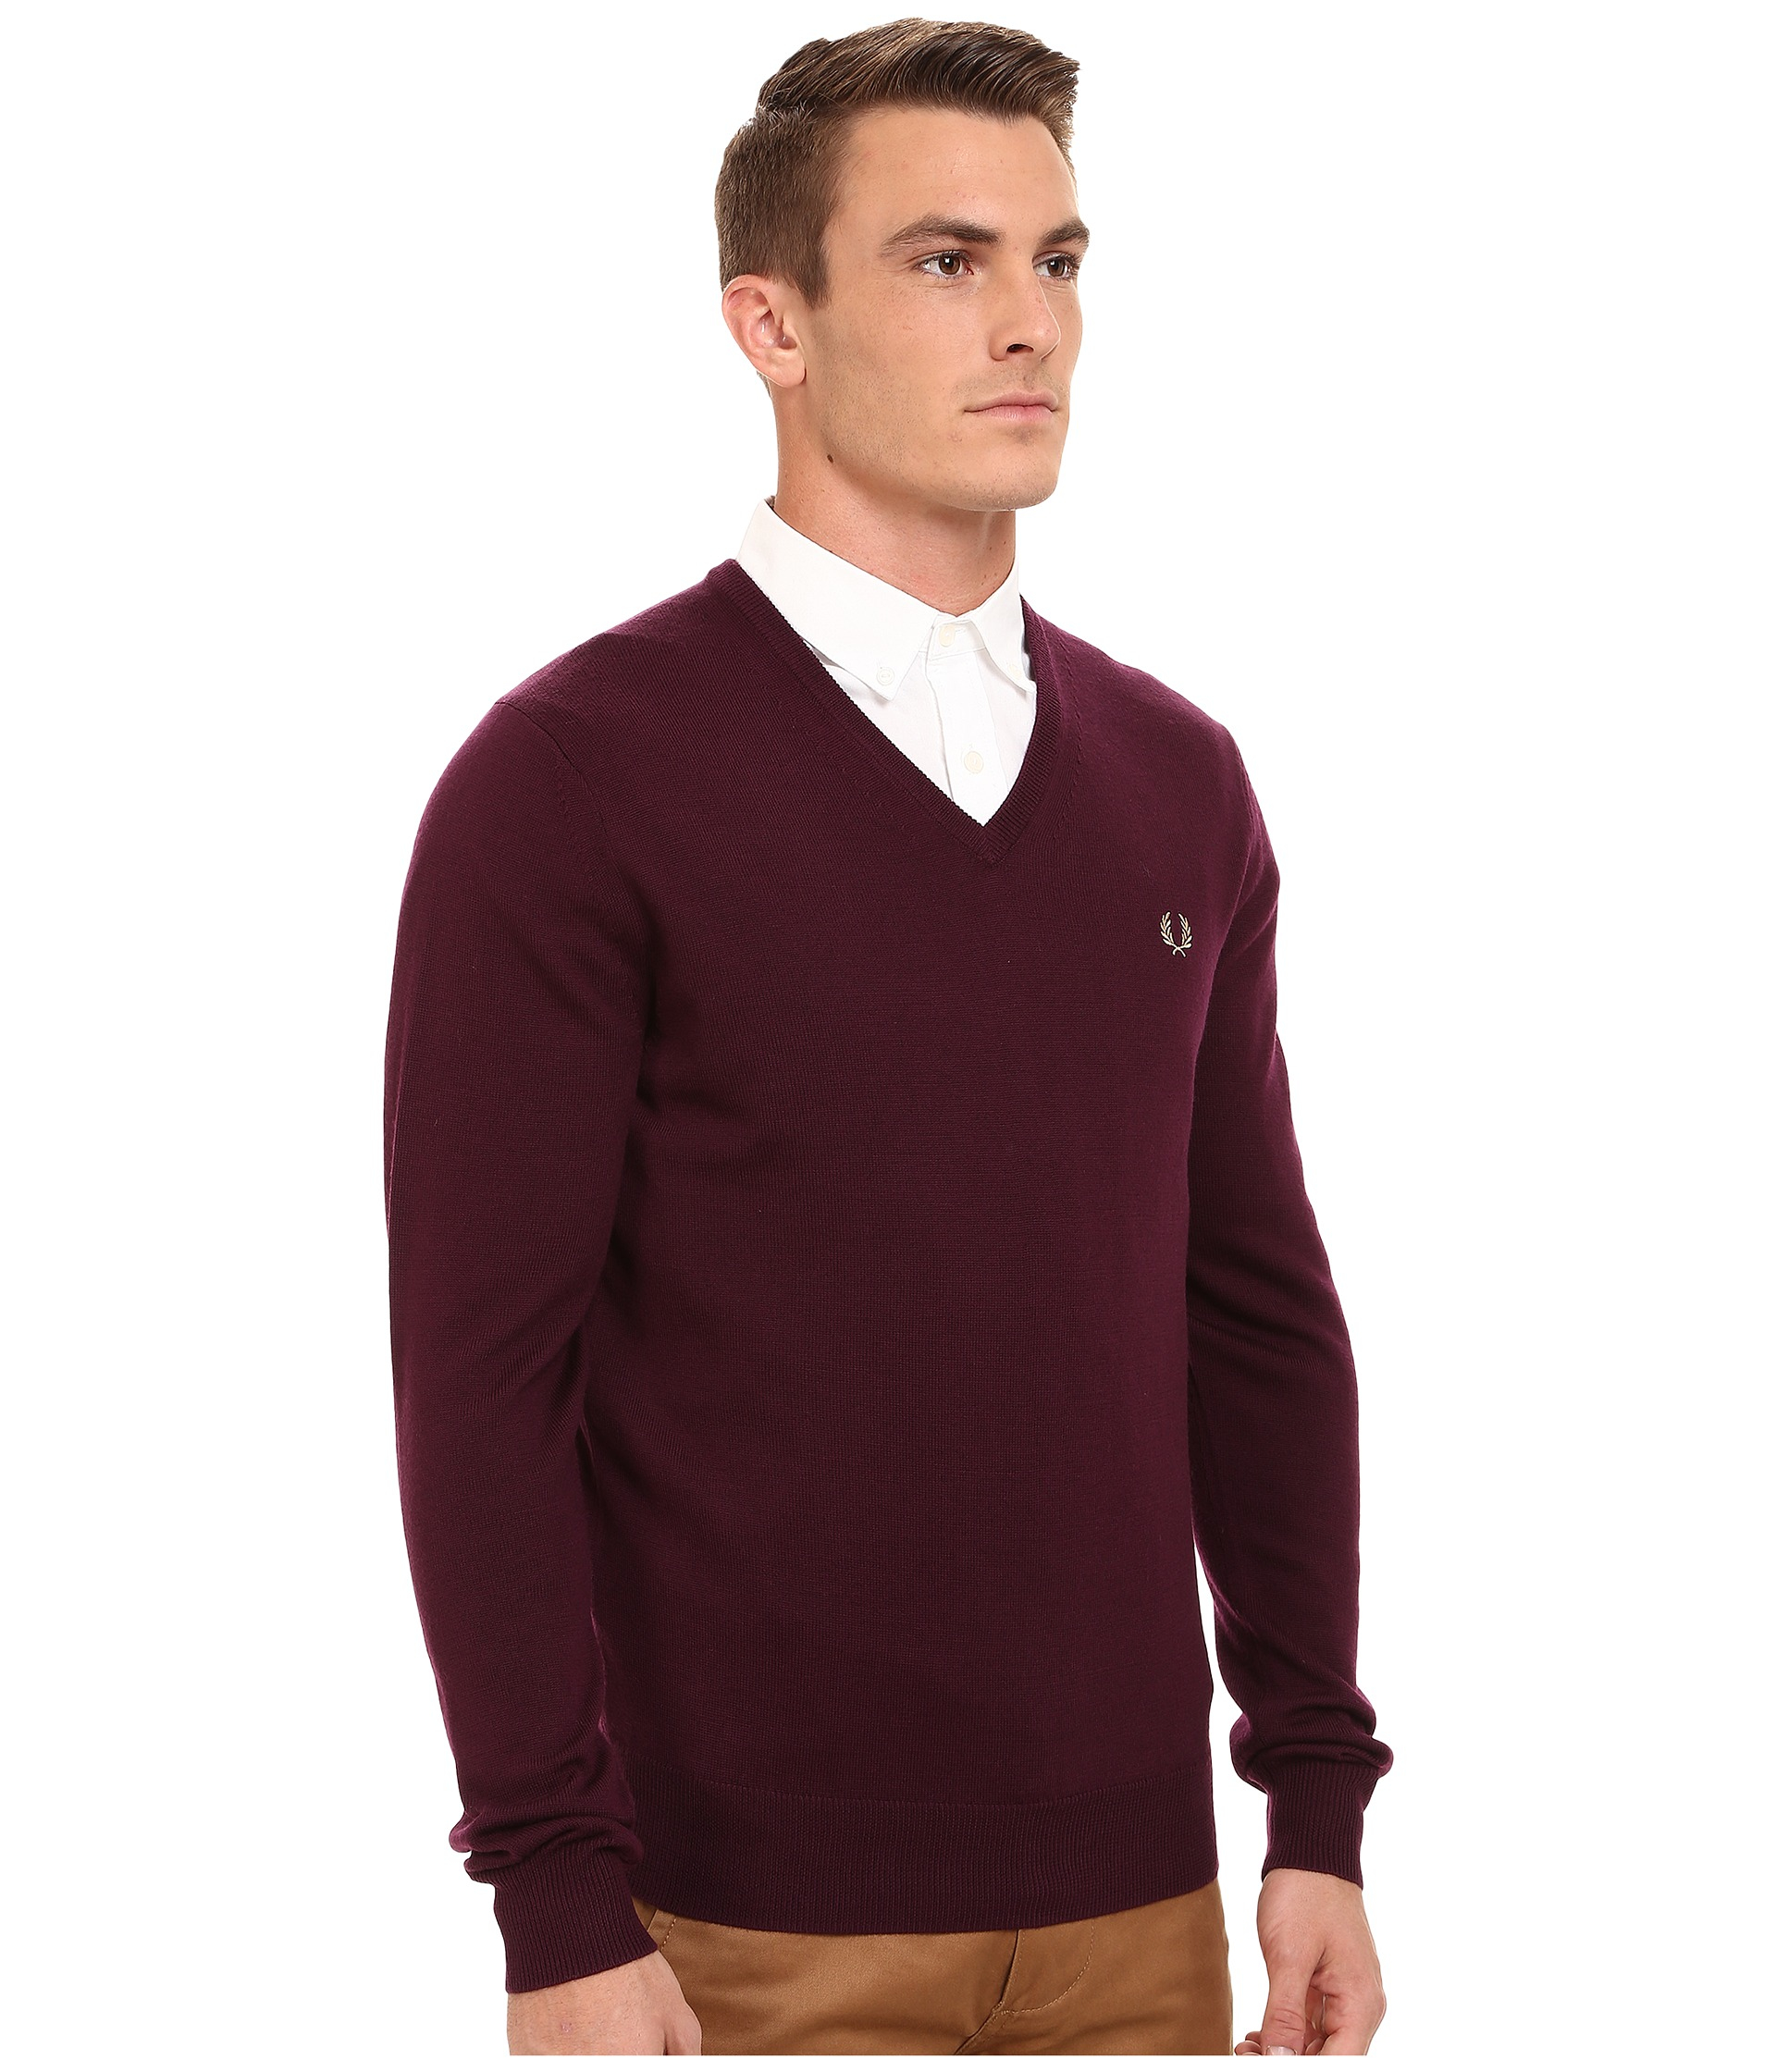 Lyst - Fred Perry Classic V-neck Sweater in Brown for Men